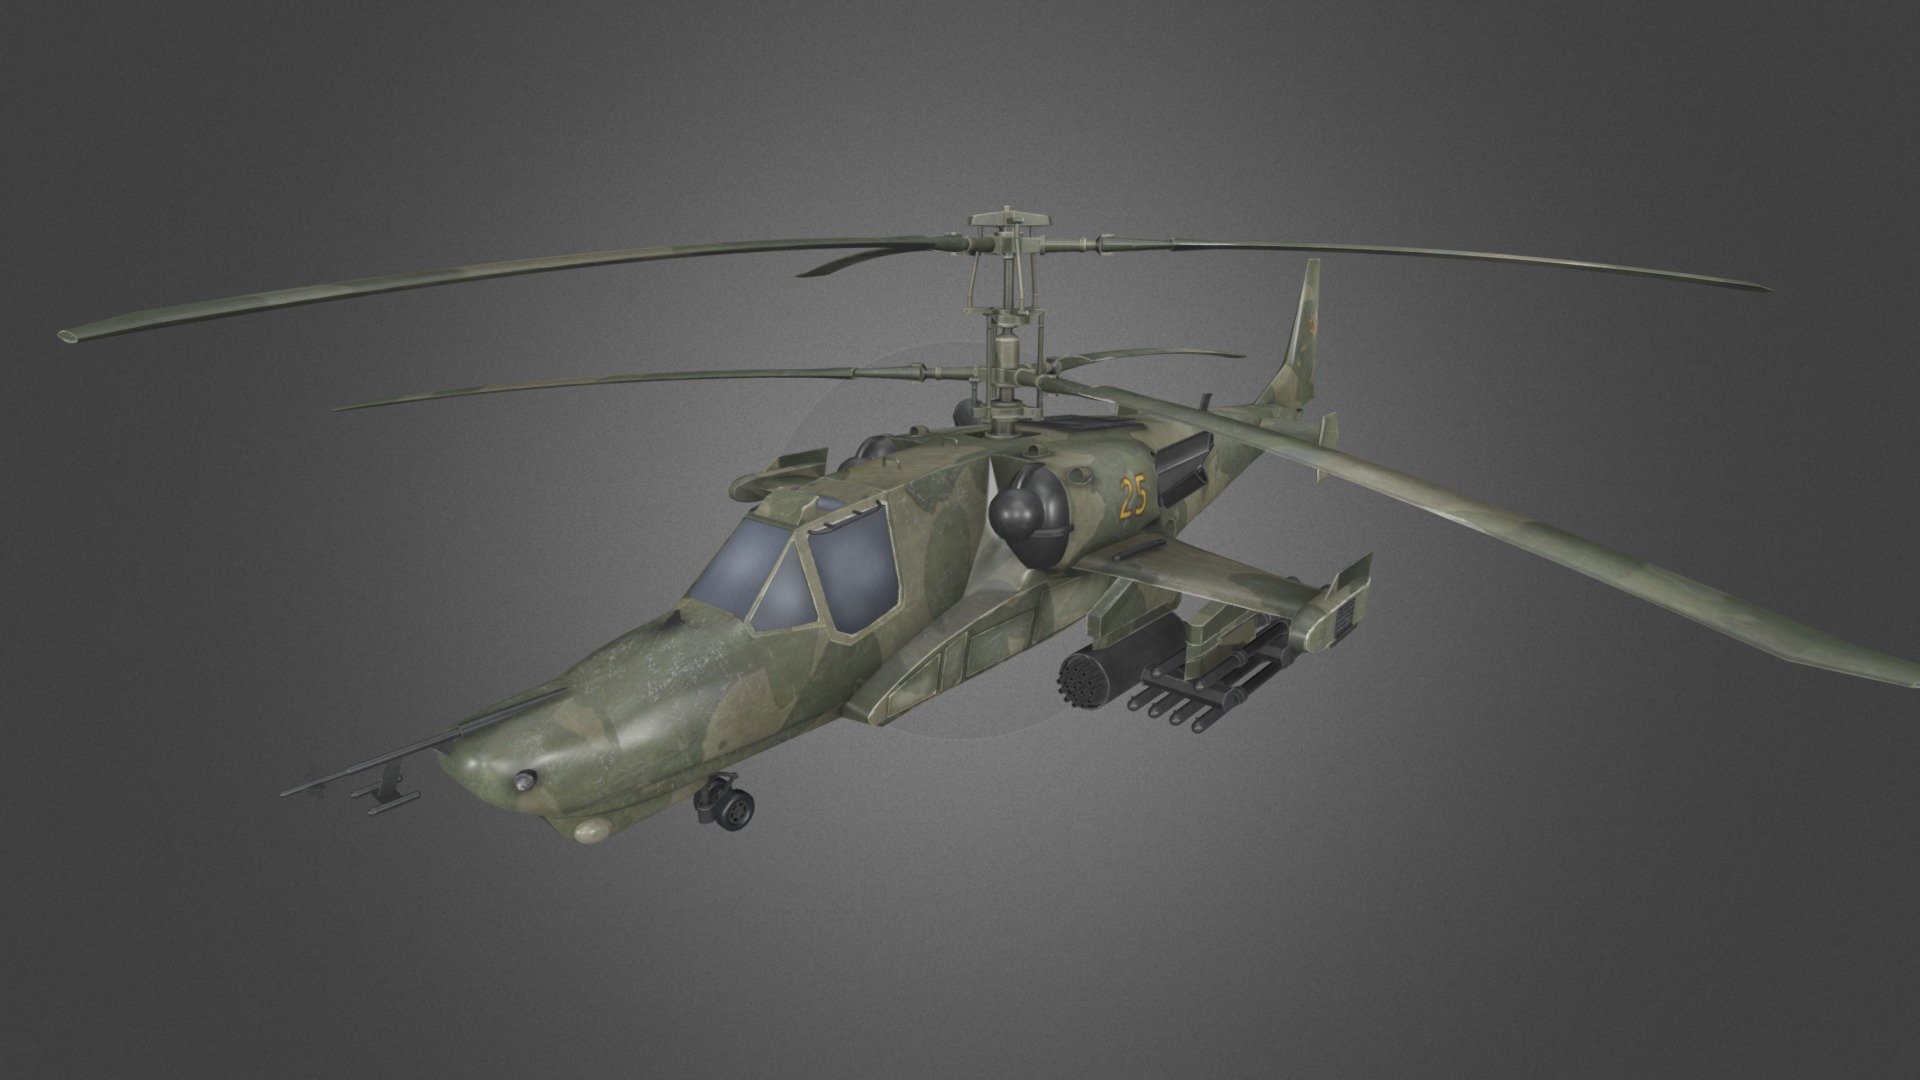 Low poly game-ready highquality and accurate 3d model of the Kamov Ka-50 Hokum Russian Attack Helicopter

Download: http://gamedev.cgduck.pro - Kamov Ka-50 Hokum Russian Attack Helicopter - 3D model by CG Duck (@cg_duck) 3d model